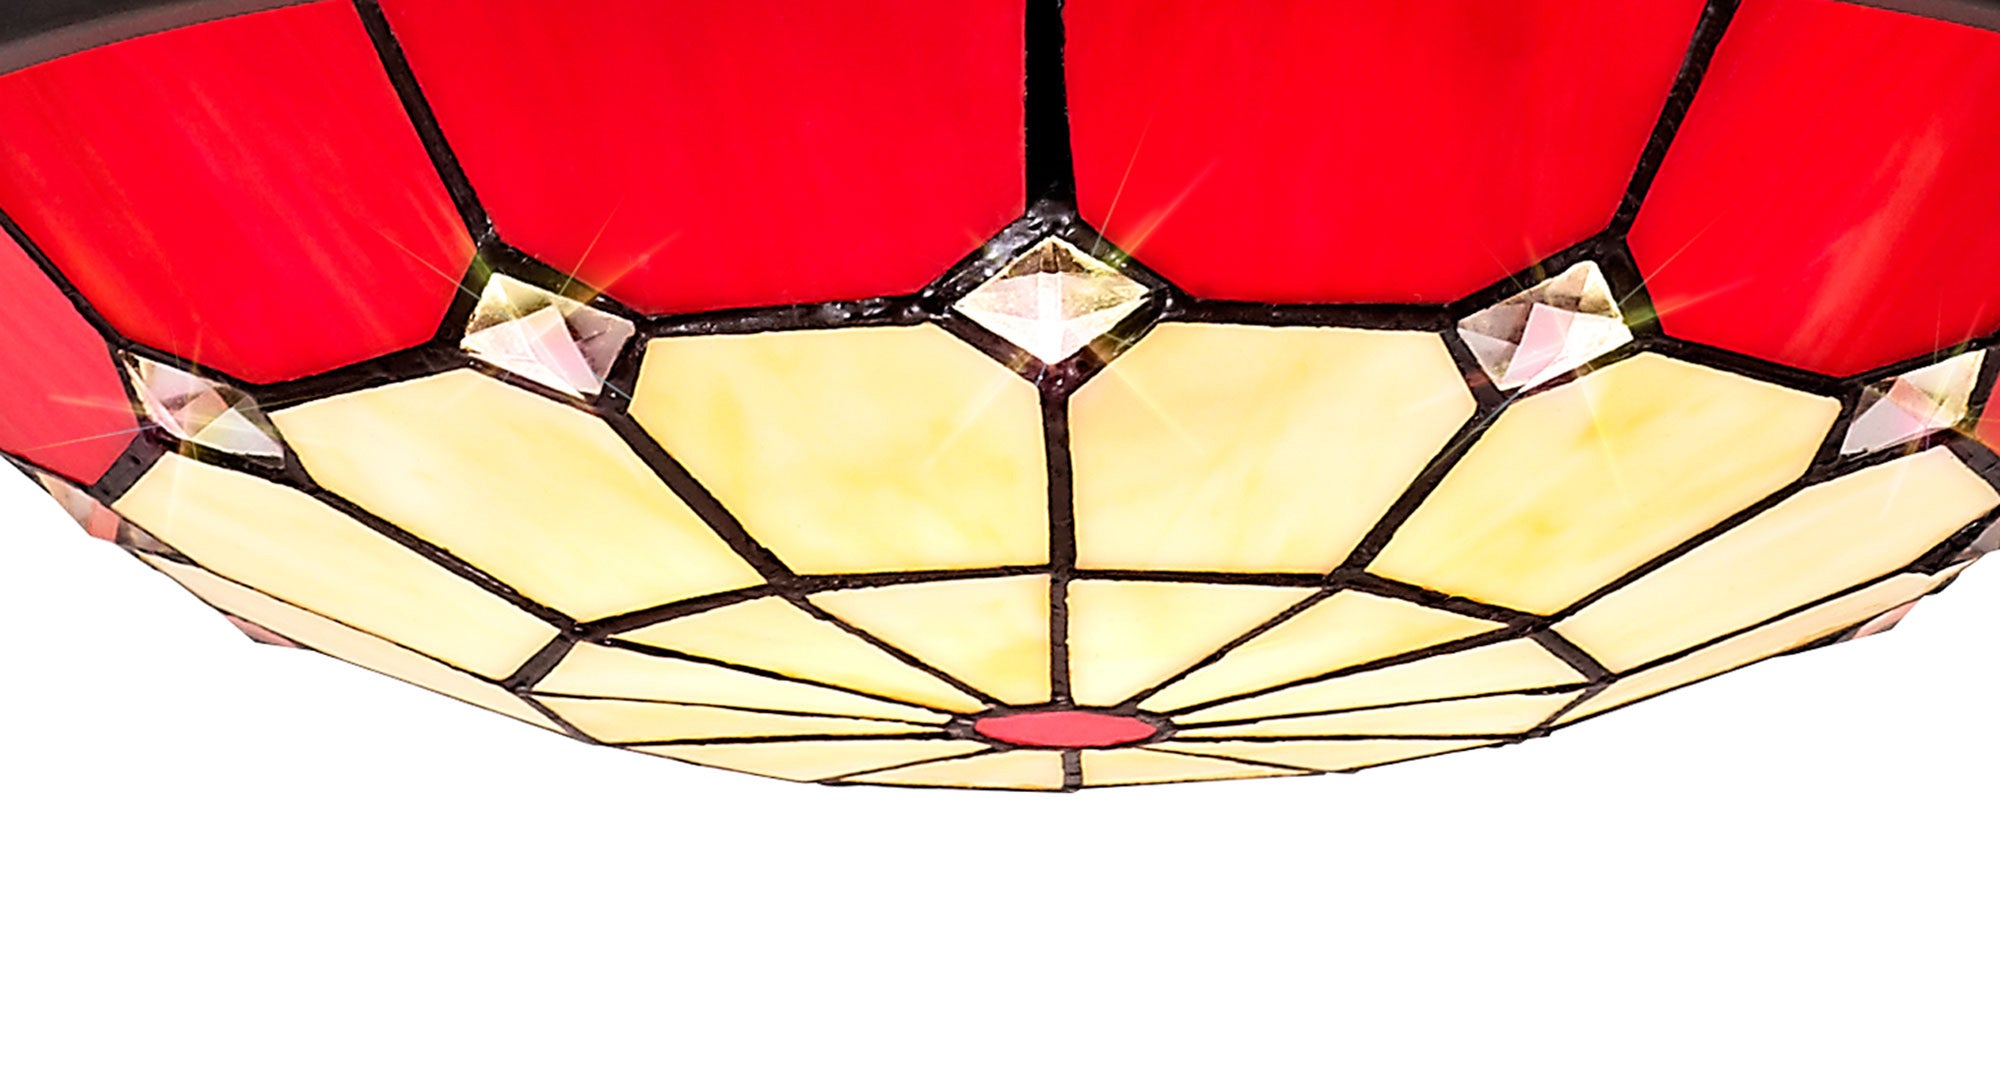 Austiffany 1 Light Pendant E27 With 35cm Tiffany Shade,  Cream/Red/Clear Crystal Centre/Aged Antique Brass Trim/Black